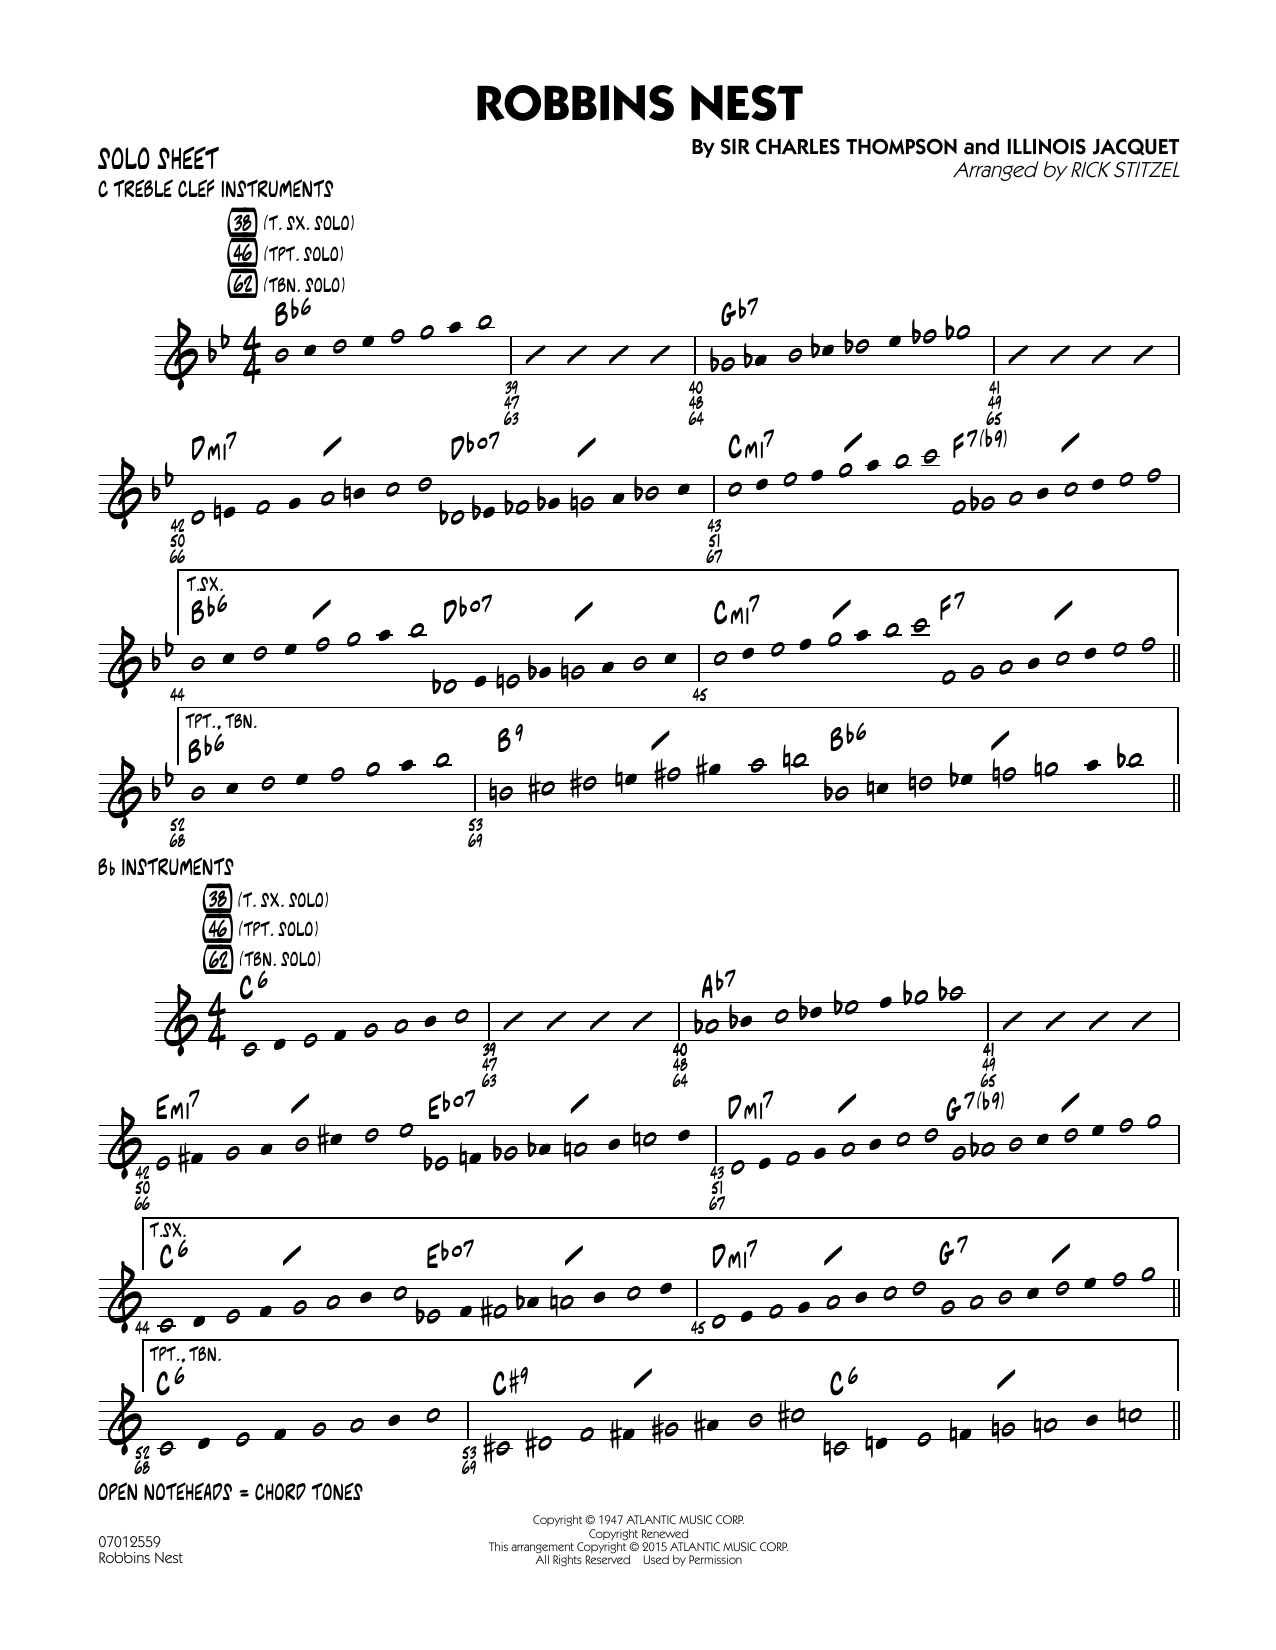 Rick Stitzel Robbins Nest - Solo Sheet sheet music notes and chords. Download Printable PDF.